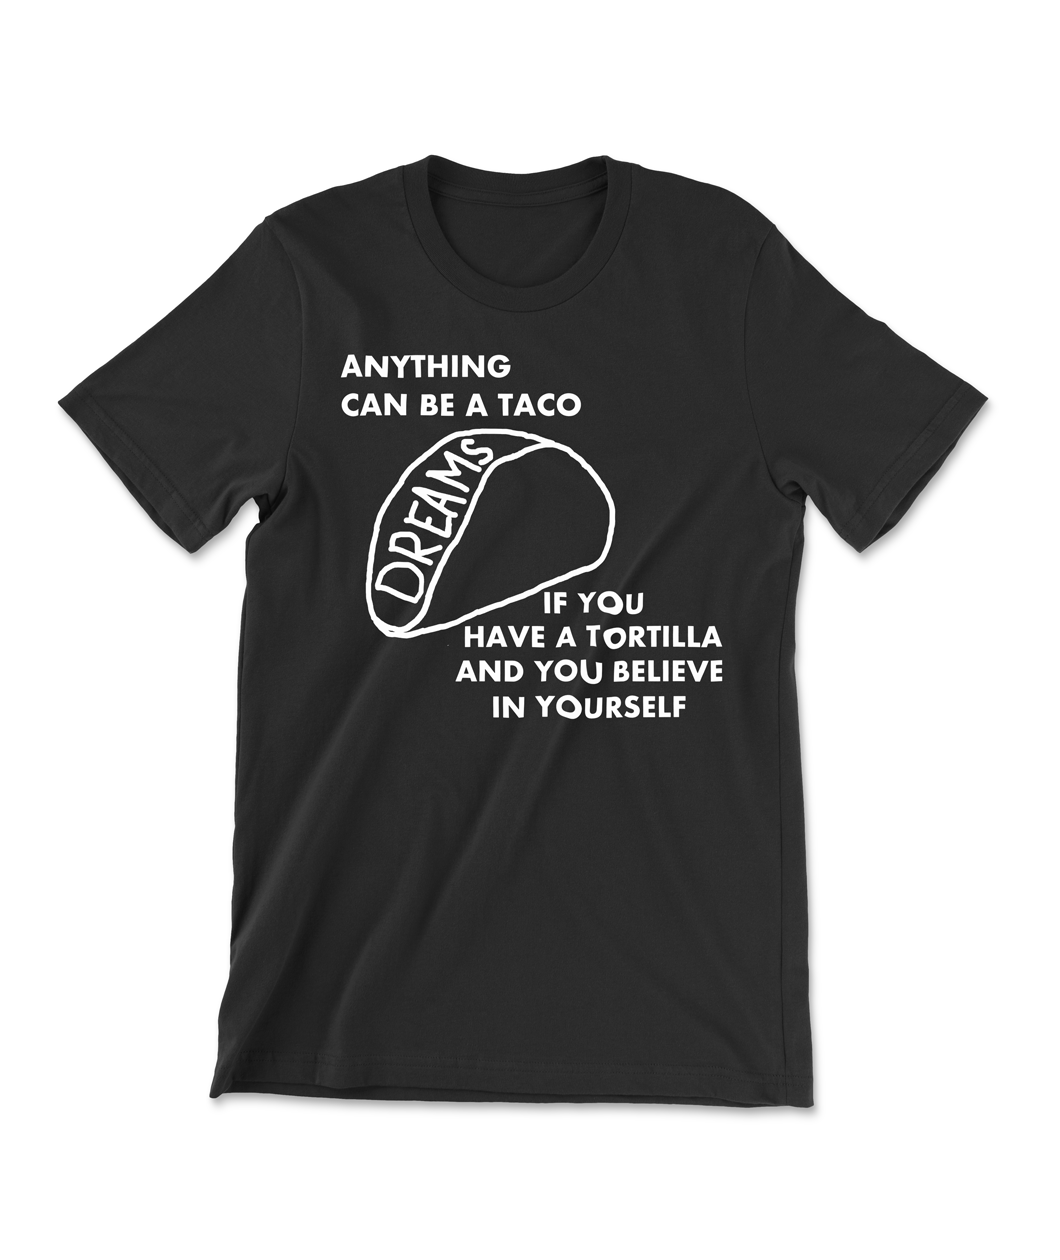 A black shirt with a taco, drawn with the word "Dreams" inside the shell. Text above and below reads "Anything can be a taco, if you have a tortilla and you believe in yourself". 